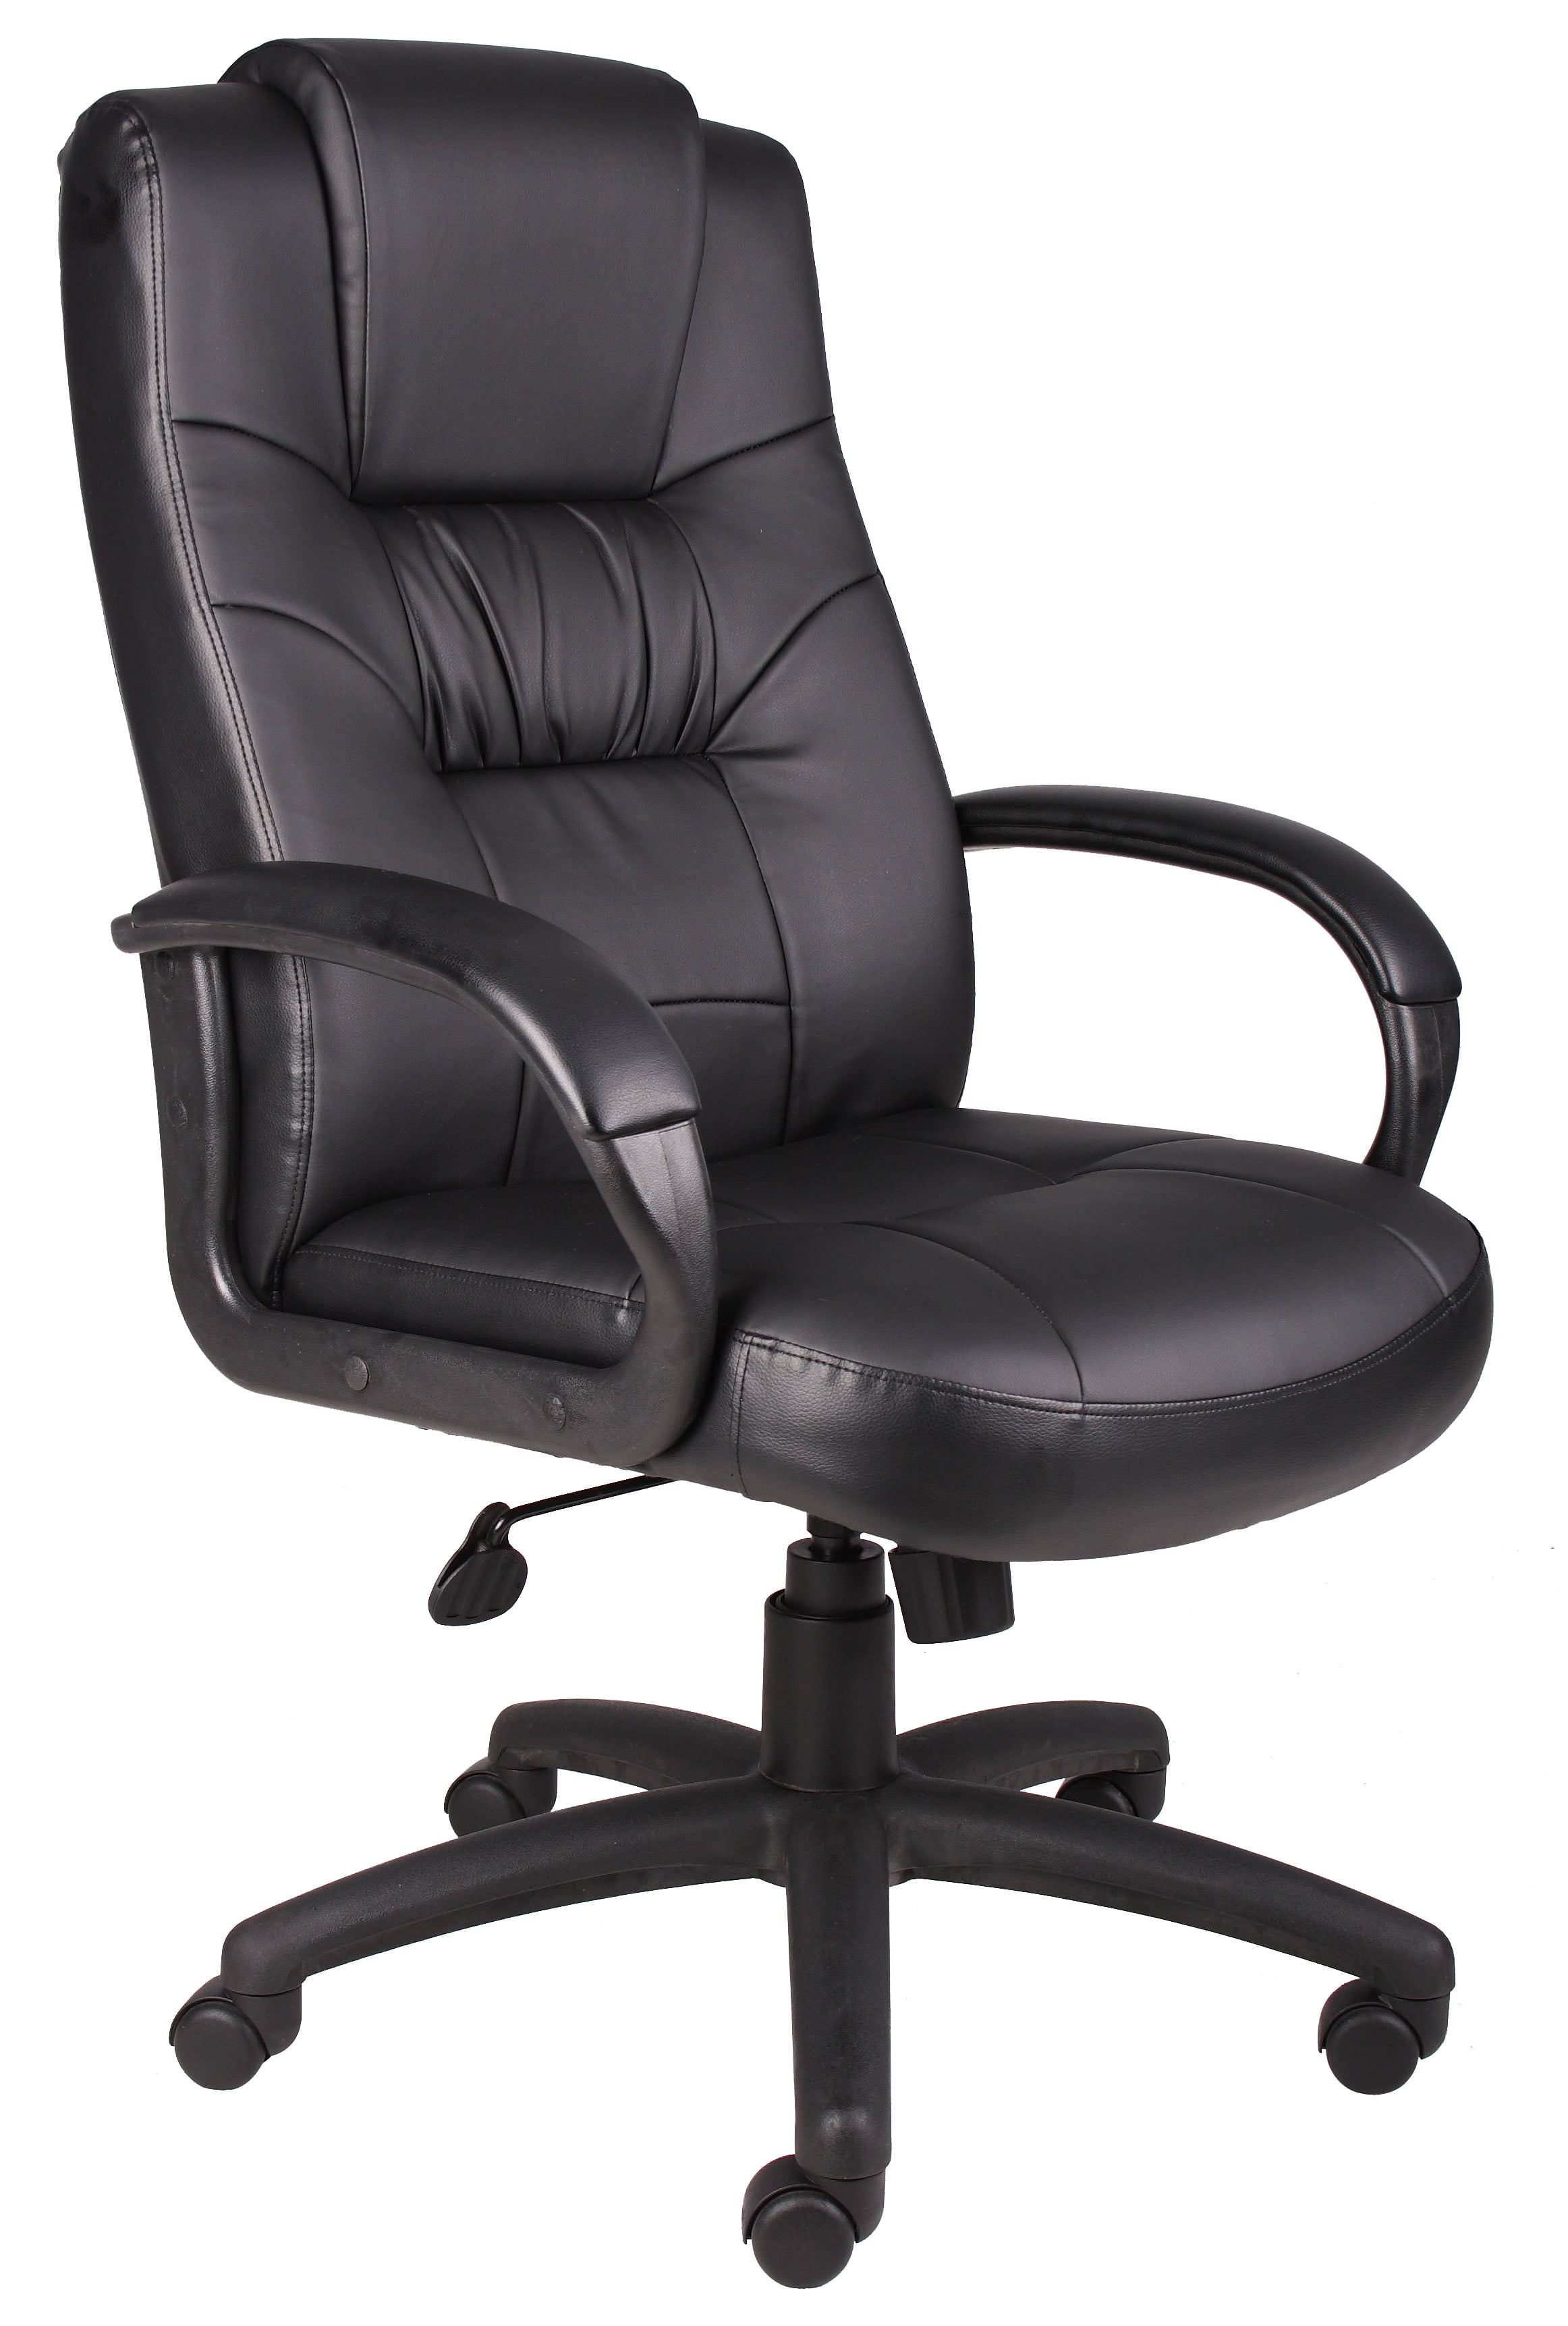 Boss Office Products Black Executive Leather High Back Chair - Walmart.com